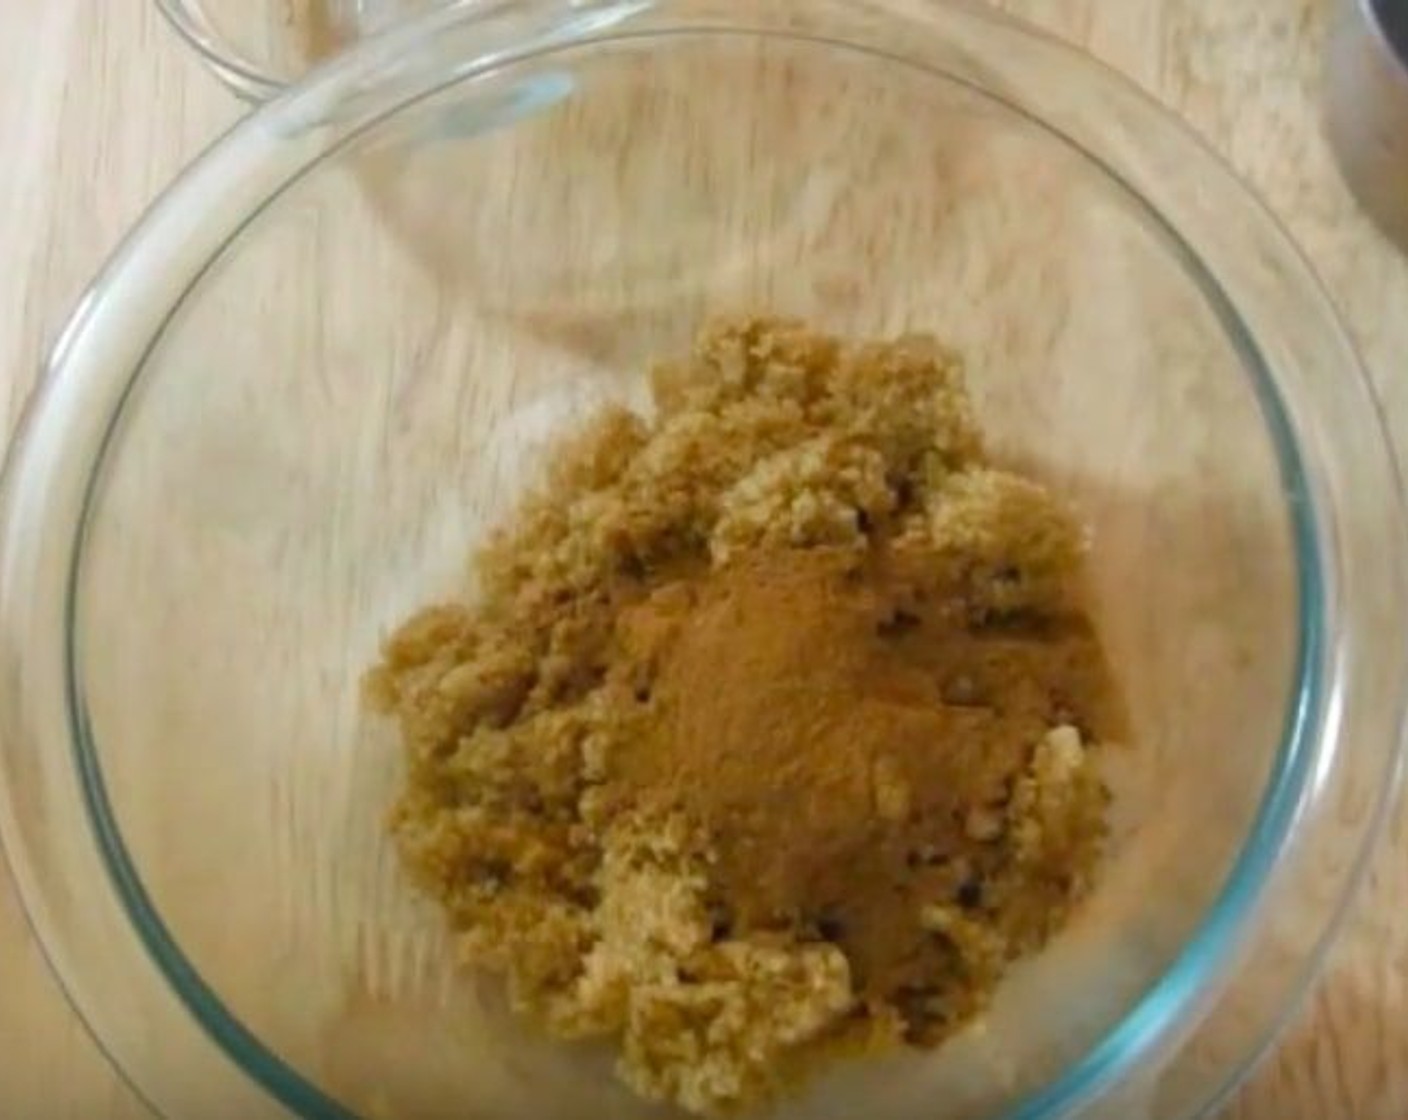 step 1 Mix together Sweetened Coconut Flakes (2 cups), Brown Sugar (1/2 cup), and Ground Cinnamon (1 Tbsp), set aside.